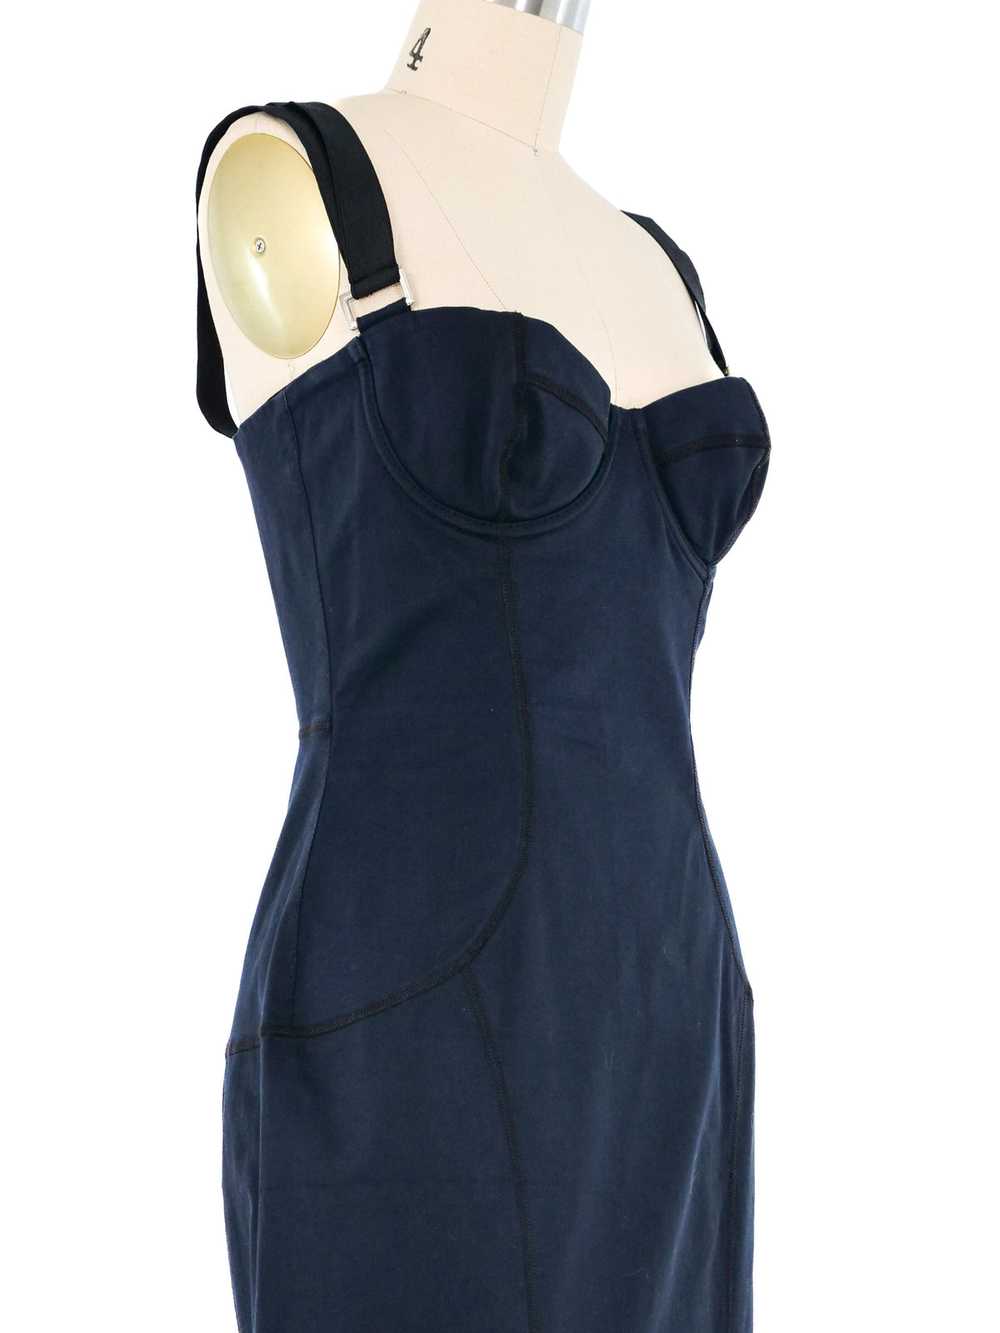 1990s Dolce And Gabbana Navy Bustier Dress - image 2